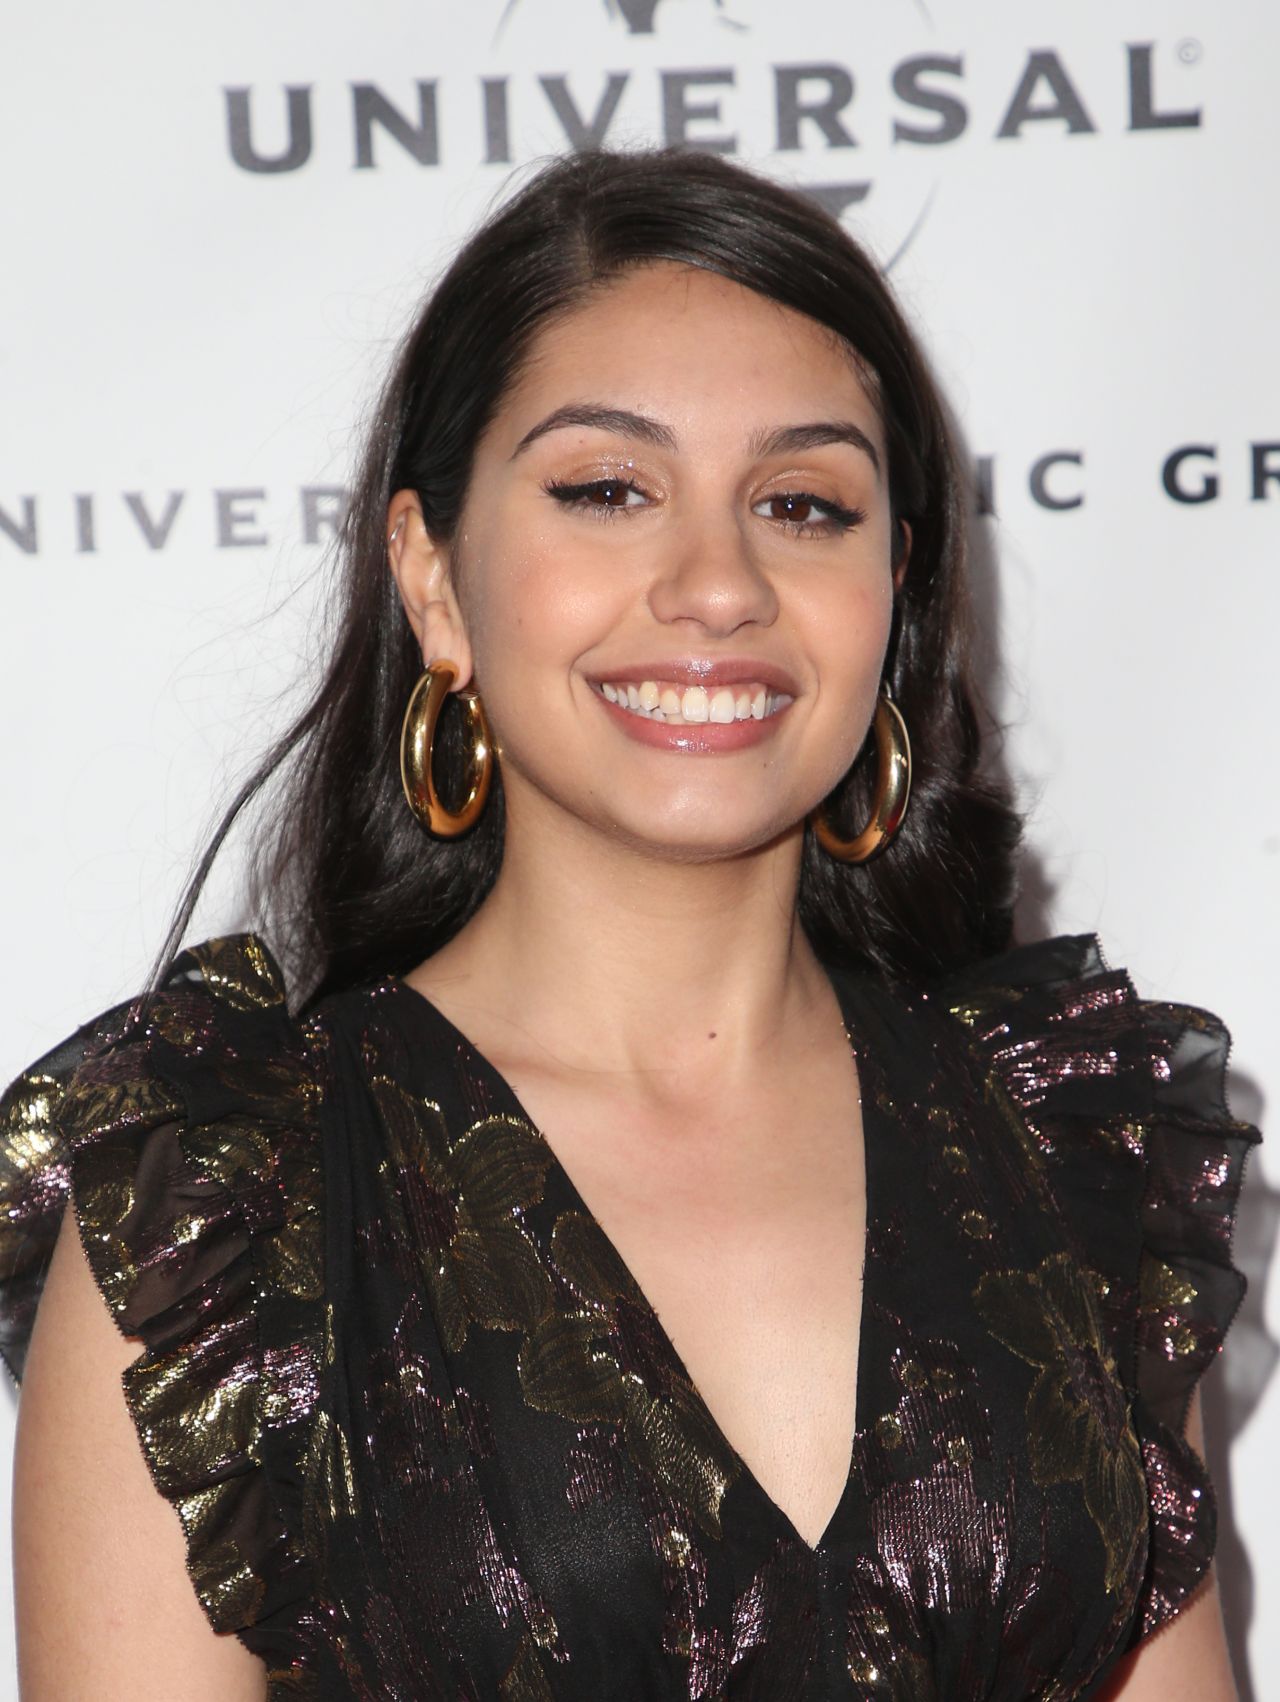 alessia-cara-universal-music-group-grammy-after-party-02-10-2019-6.jpg